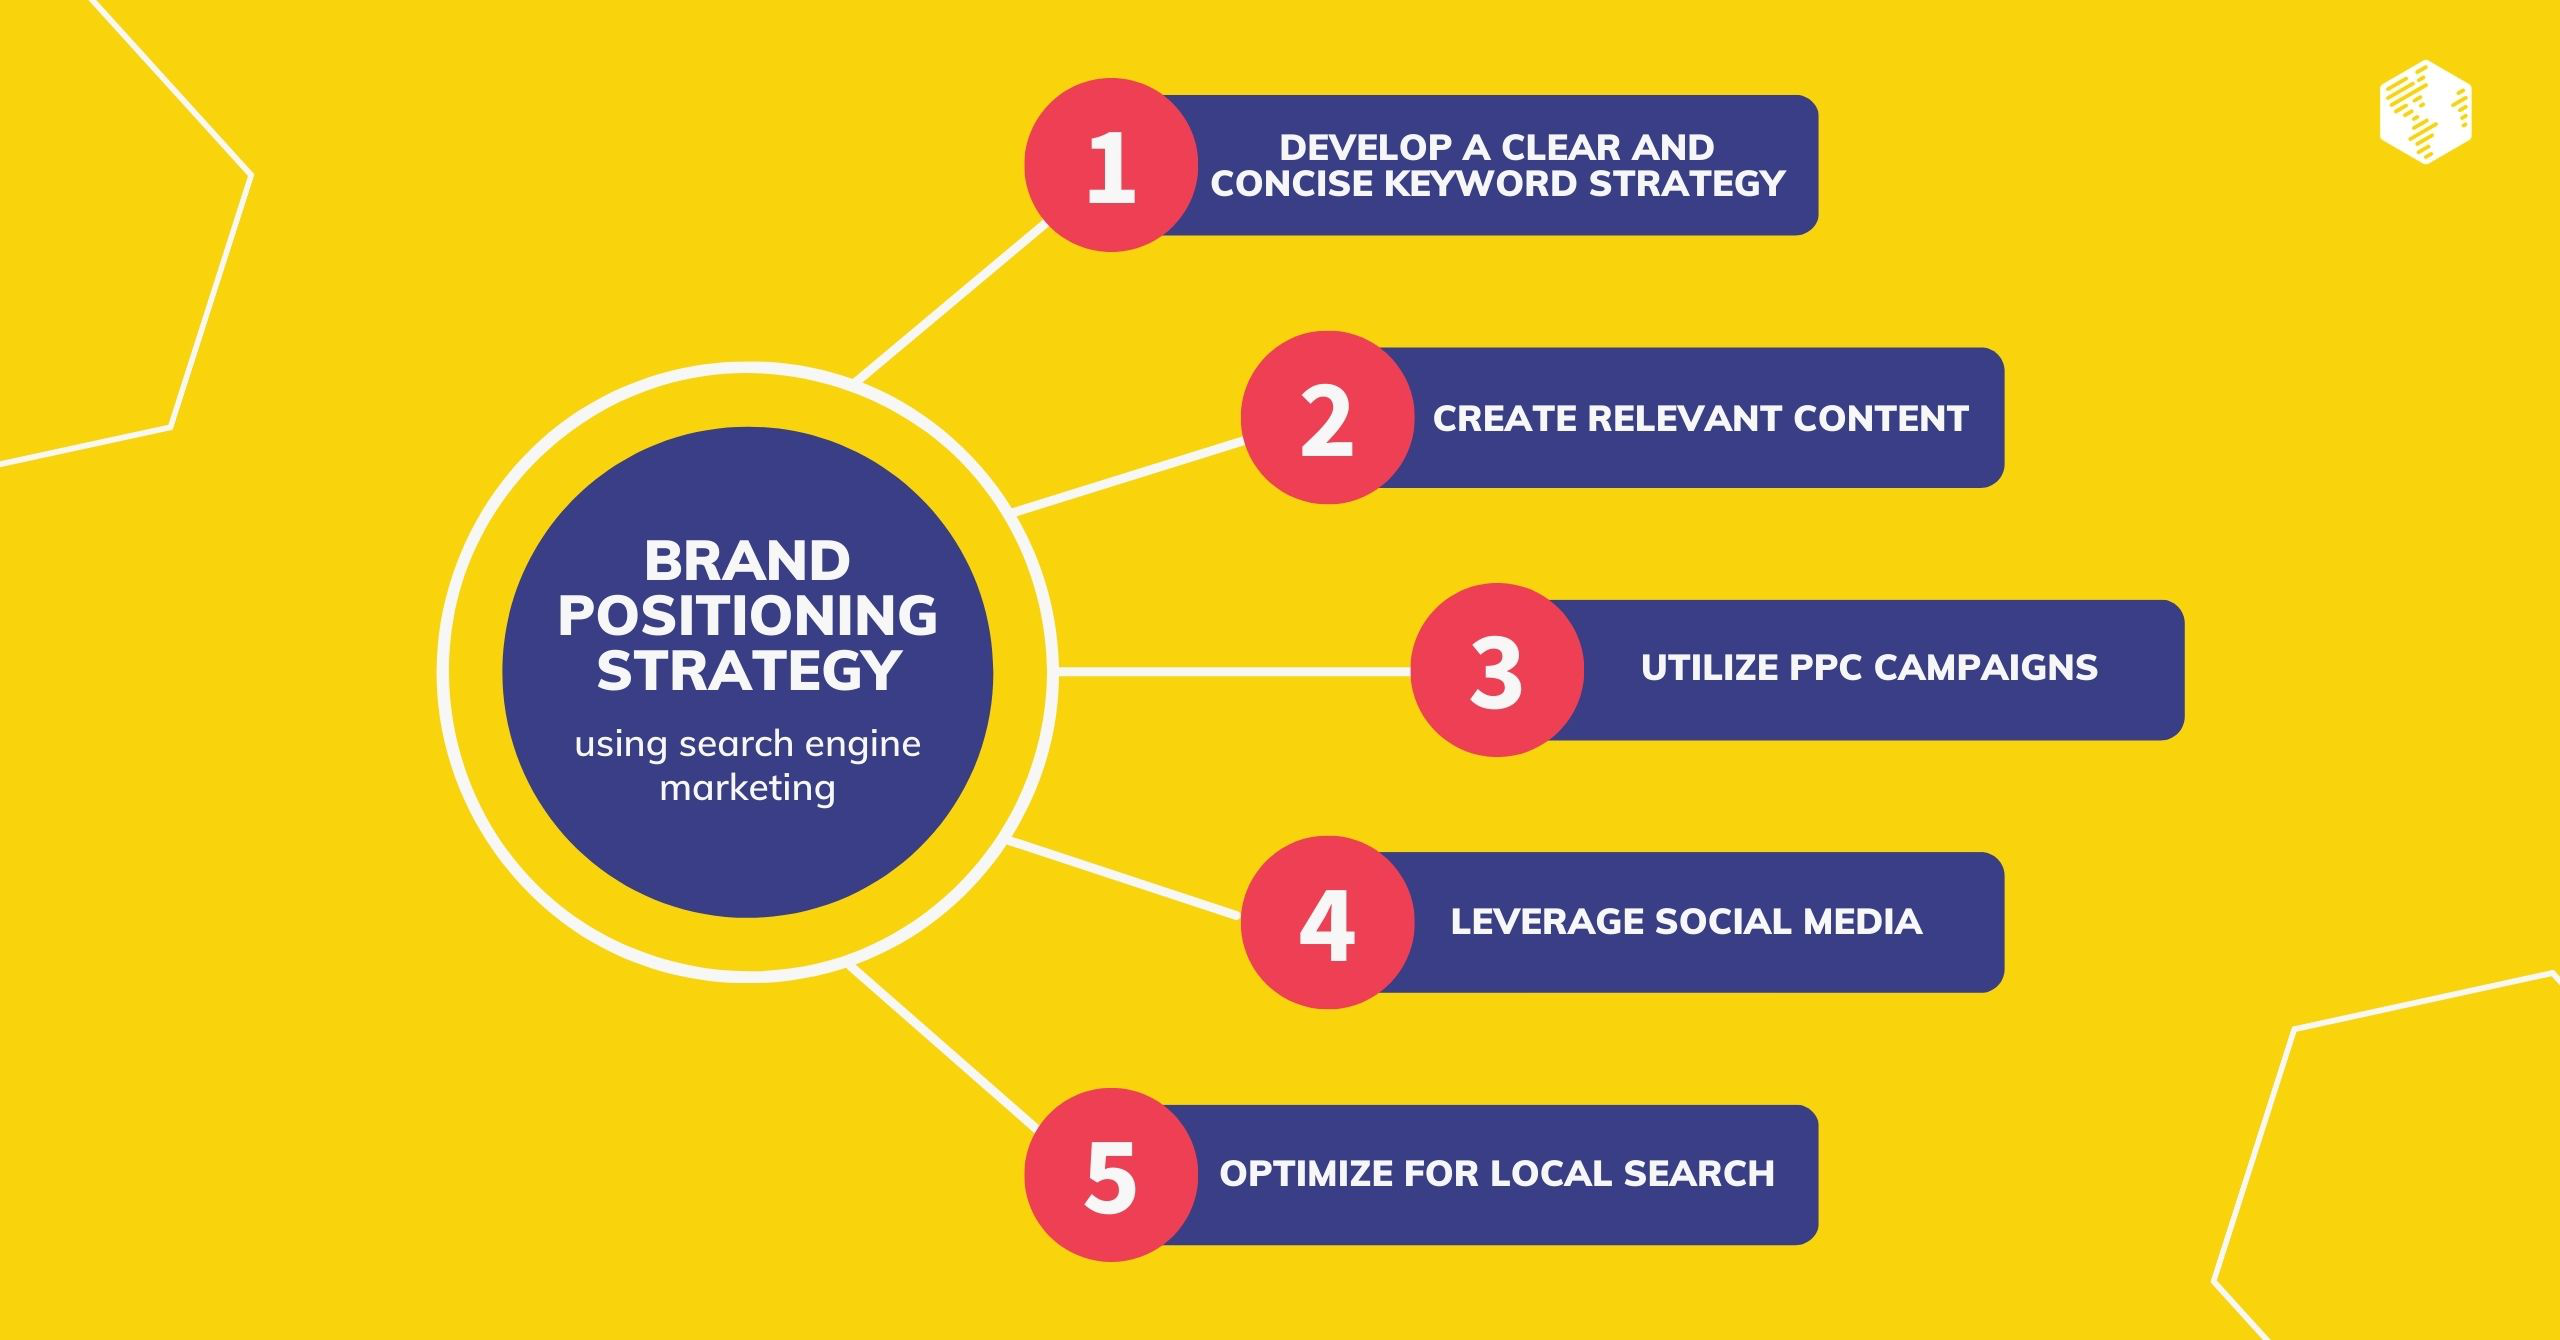 Brand positioning strategy using search engine marketing